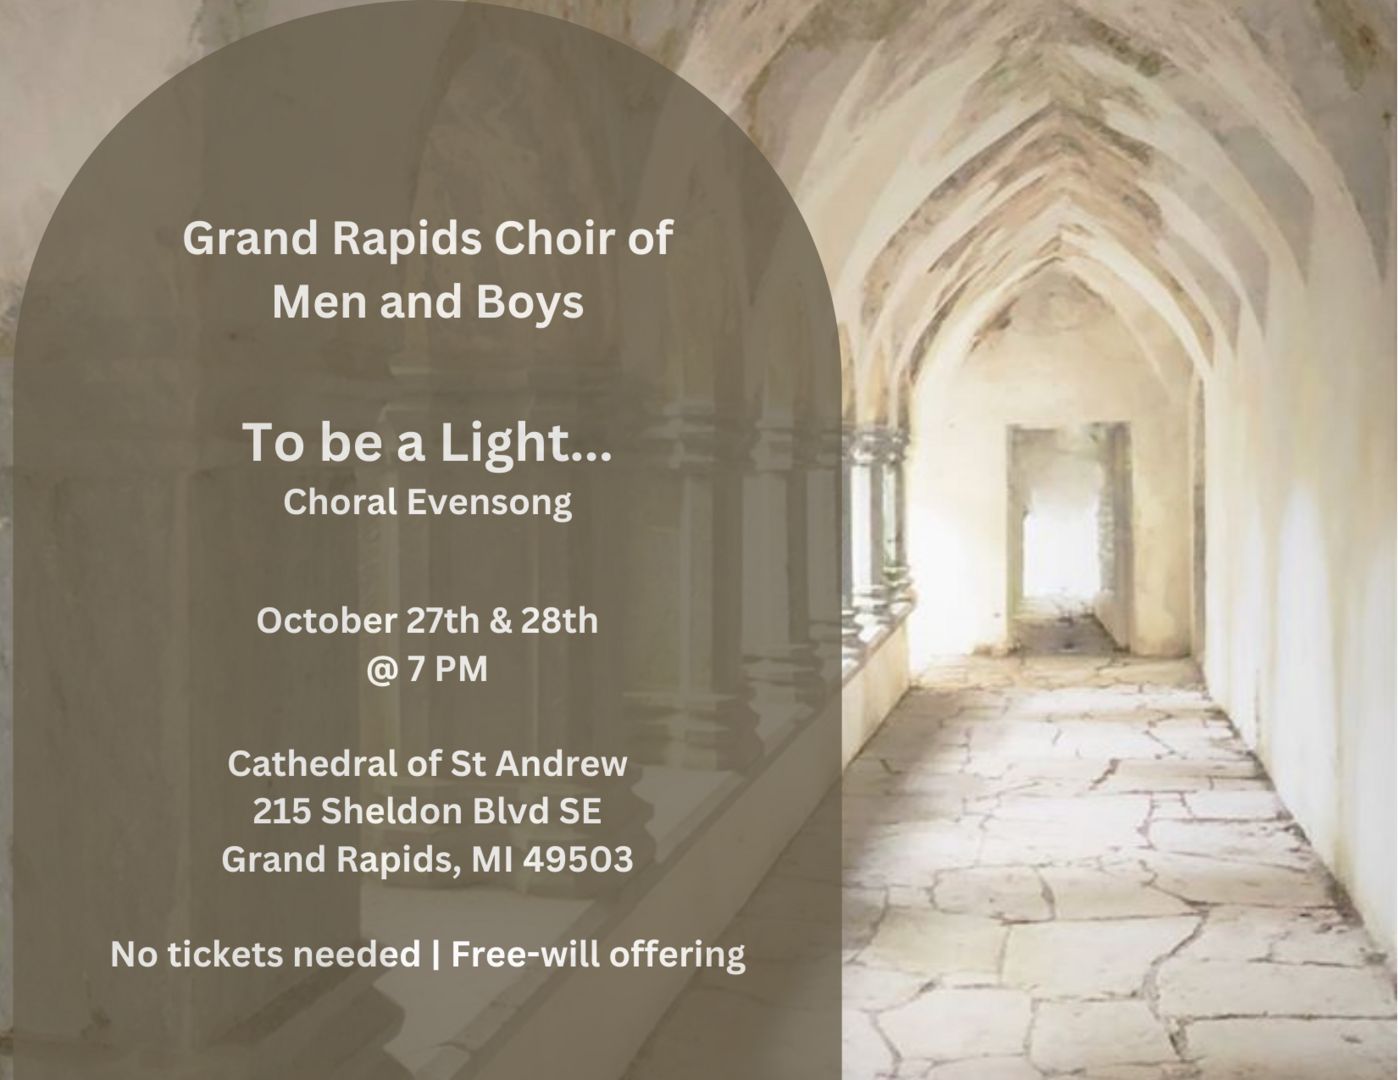 Grand Rapids Choir of Men and Boys - Choral Evensong - October 27th and 28th, Grand Rapids, Michigan, United States